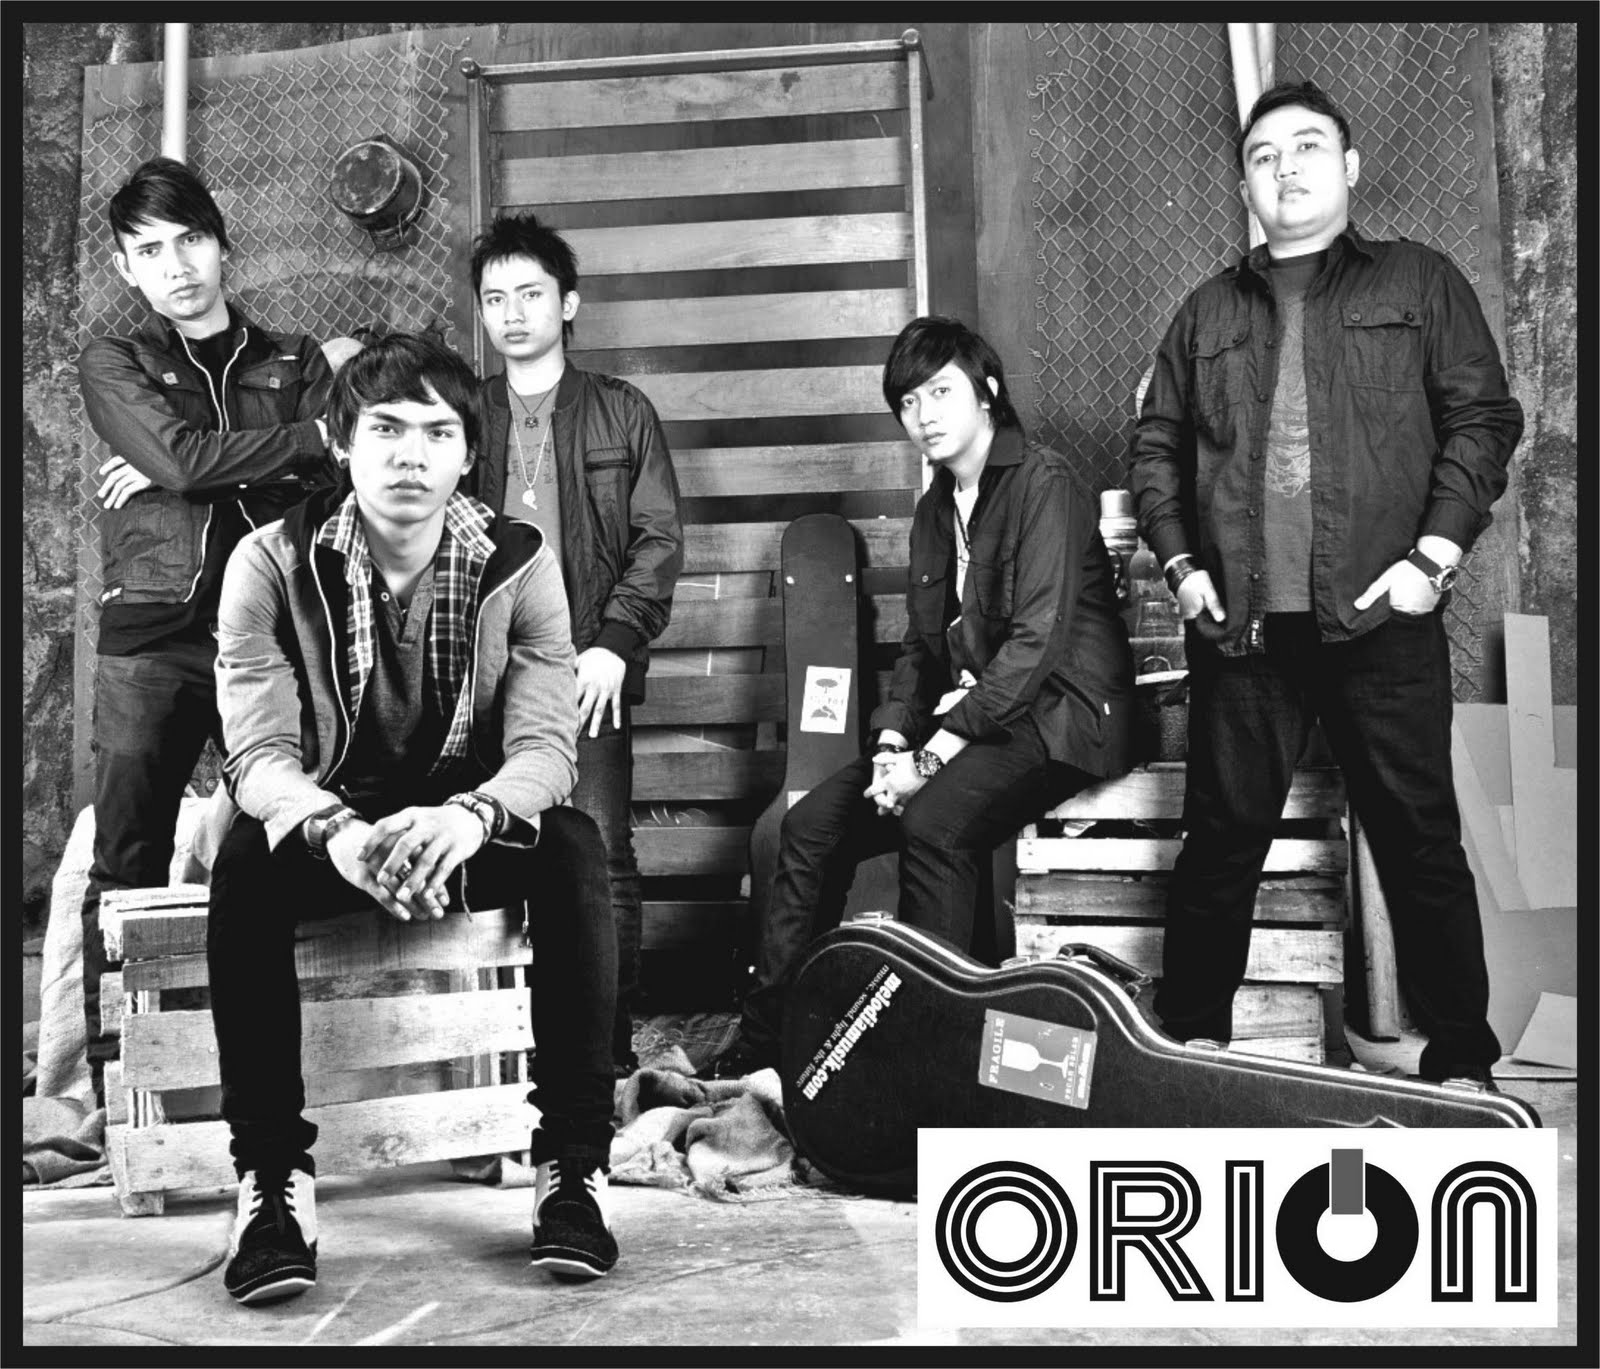 4shared  Download on Orion   Terlalu Tangguh   Download Mp3 Indonesia 4shared